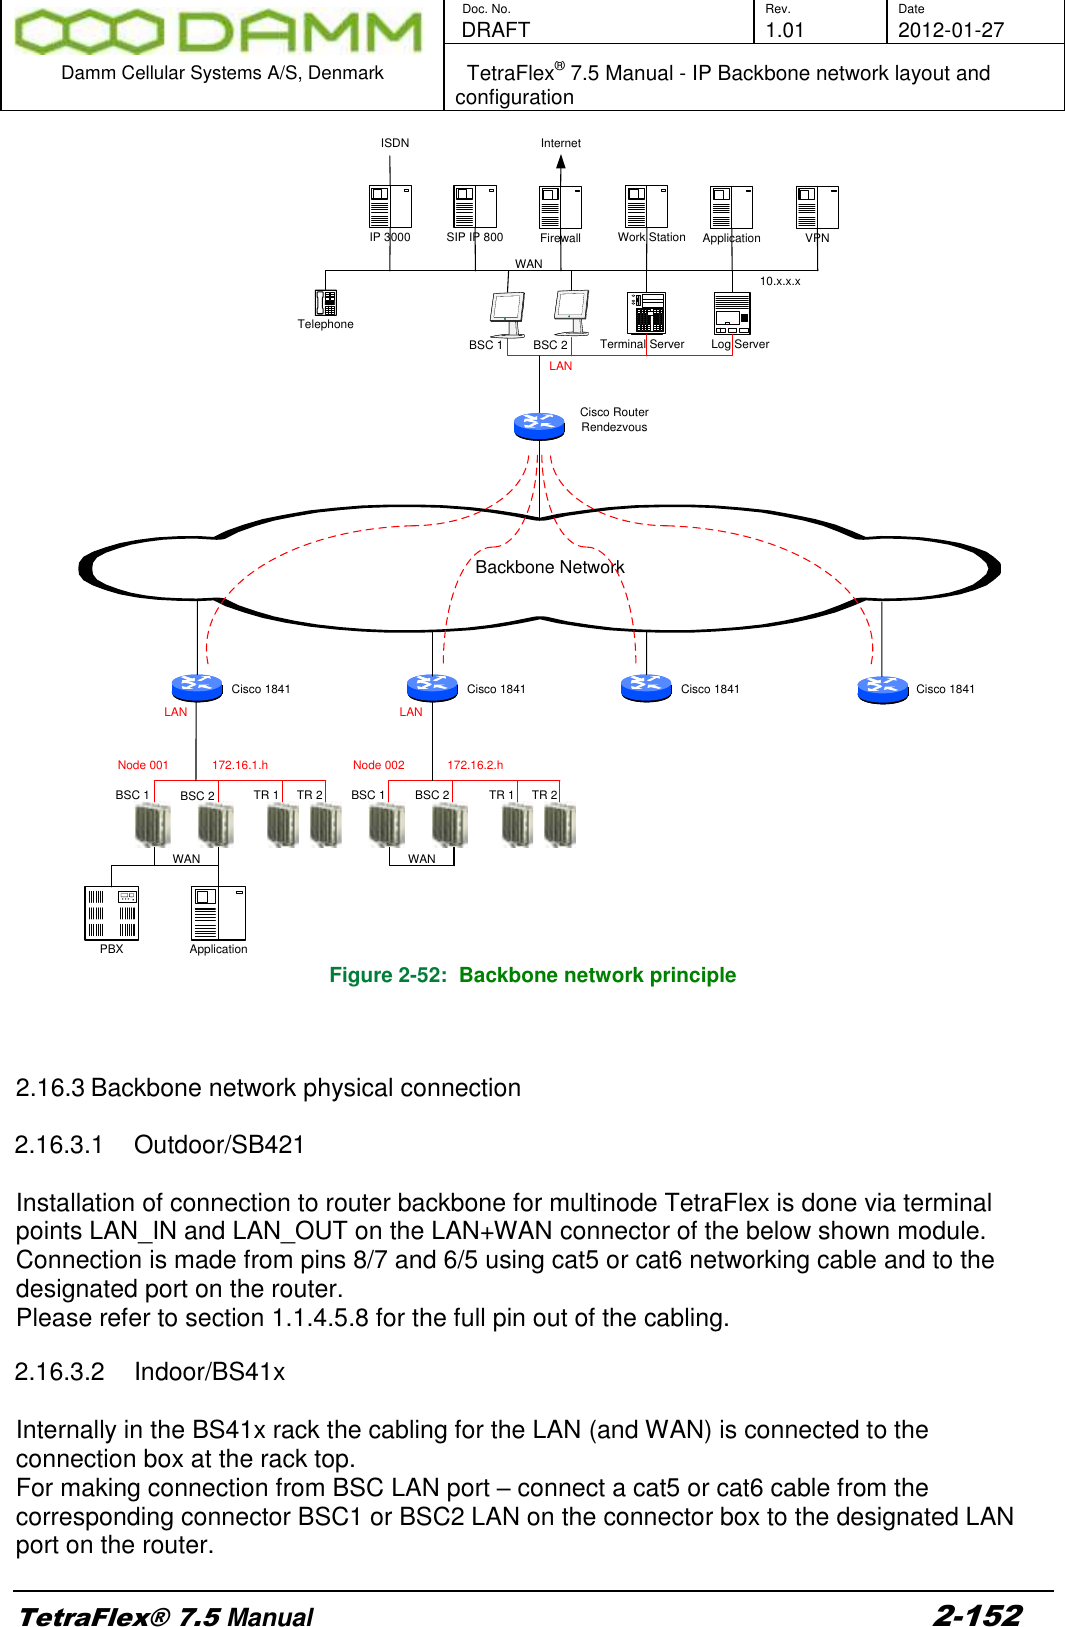        Doc. No. Rev. Date    DRAFT  1.01 2012-01-27  Damm Cellular Systems A/S, Denmark   TetraFlex® 7.5 Manual - IP Backbone network layout and configuration  TetraFlex® 7.5 Manual 2-152 BSC 1 TR 1Node 001 172.16.1.hWANLANWANLANBackbone NetworkPBXBSC 2 BSC 1 BSC 2 TR 1 TR 2TR 2Node 002 172.16.2.h     Log ServerApplicationCisco RouterRendezvousCisco 1841 Cisco 1841 Cisco 1841 Cisco 1841   Terminal ServerBSC 1 BSC 2Firewall    Work Station Application VPNSIP IP 800IP 3000TelephoneInternetISDN10.x.x.xLANWAN Figure 2-52:  Backbone network principle    2.16.3 Backbone network physical connection  2.16.3.1  Outdoor/SB421  Installation of connection to router backbone for multinode TetraFlex is done via terminal points LAN_IN and LAN_OUT on the LAN+WAN connector of the below shown module. Connection is made from pins 8/7 and 6/5 using cat5 or cat6 networking cable and to the designated port on the router.  Please refer to section 1.1.4.5.8 for the full pin out of the cabling.  2.16.3.2  Indoor/BS41x  Internally in the BS41x rack the cabling for the LAN (and WAN) is connected to the connection box at the rack top. For making connection from BSC LAN port – connect a cat5 or cat6 cable from the corresponding connector BSC1 or BSC2 LAN on the connector box to the designated LAN port on the router.  